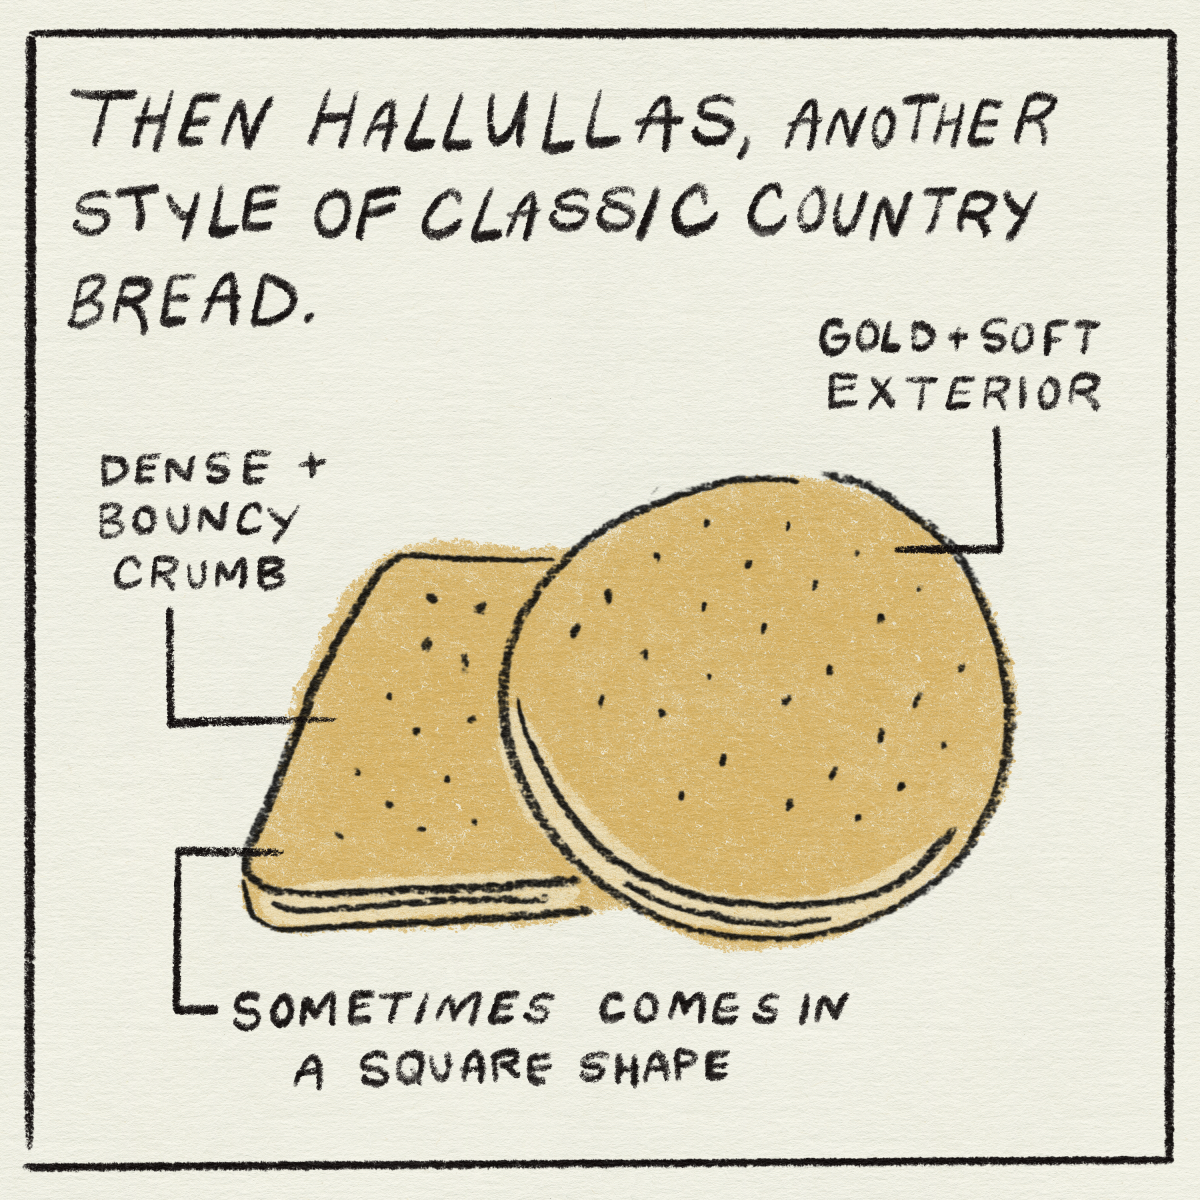 Then Hallullas, another style of classic country bread." "dense + bouncy crumb, gold + soft exterior."